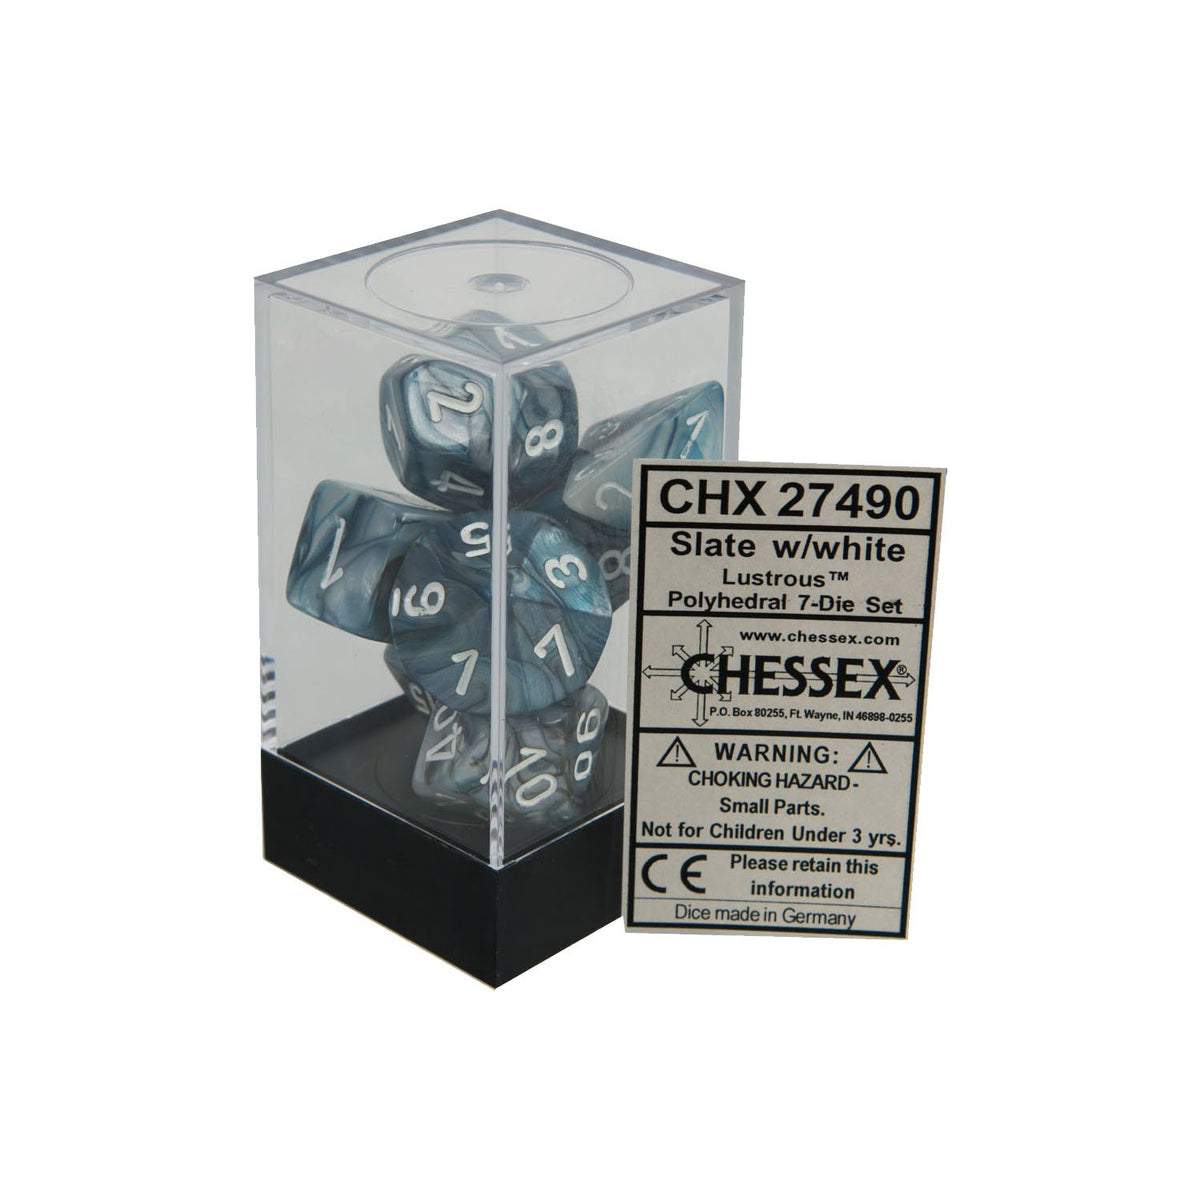 Chessex - Lustrous Polyhedral 7-Die Set - Slate/White (CHX27490)